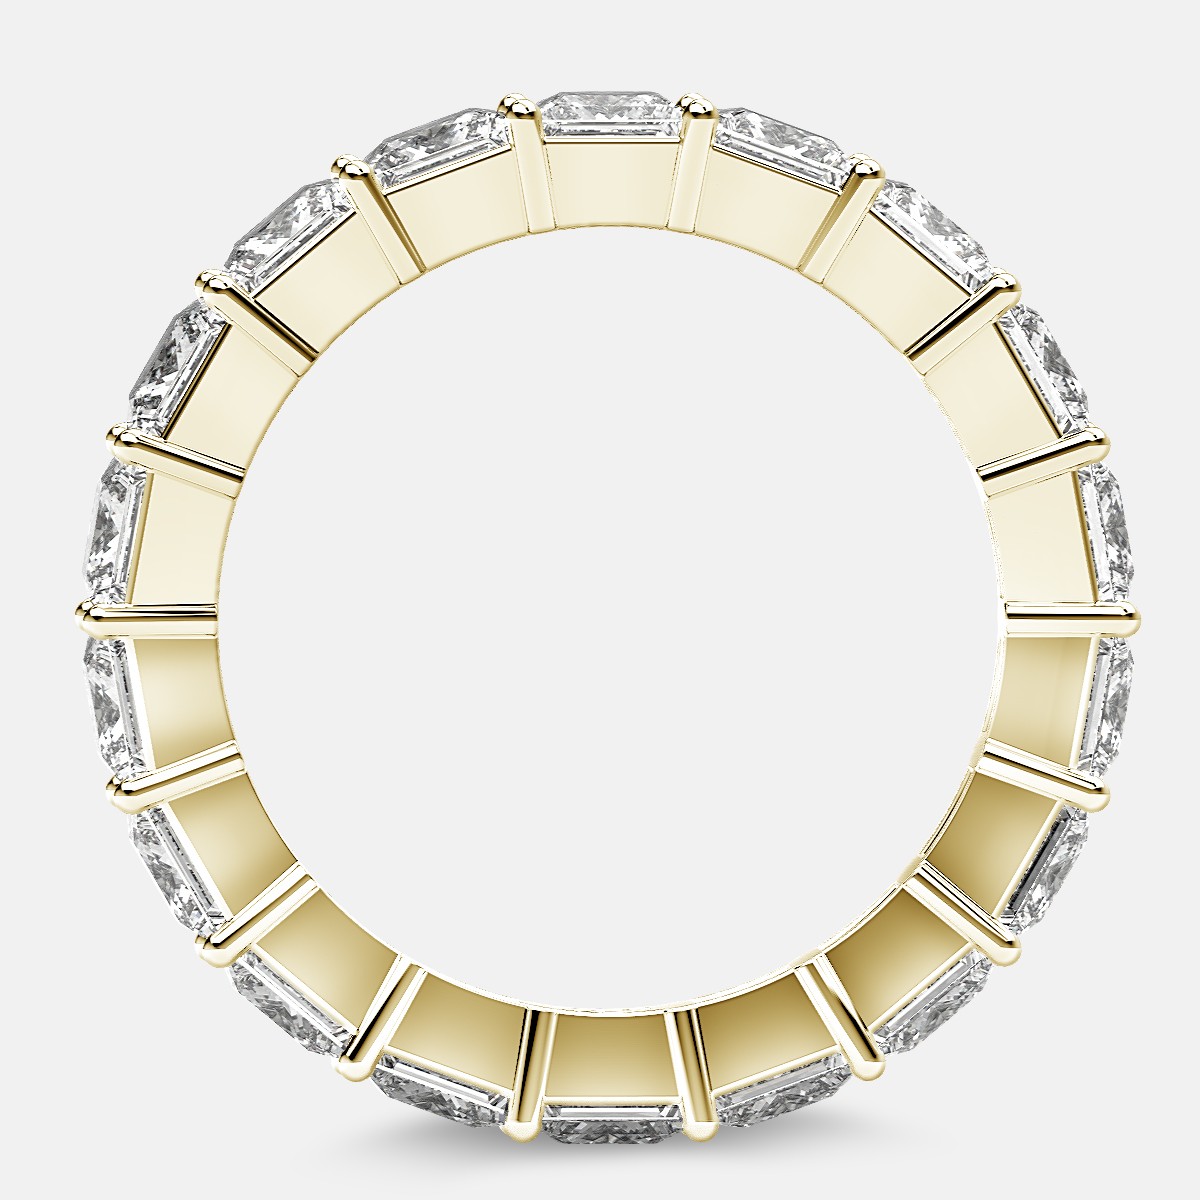 Classic Eternity Ring with Princess Cut Diamonds in 18k Yellow Gold